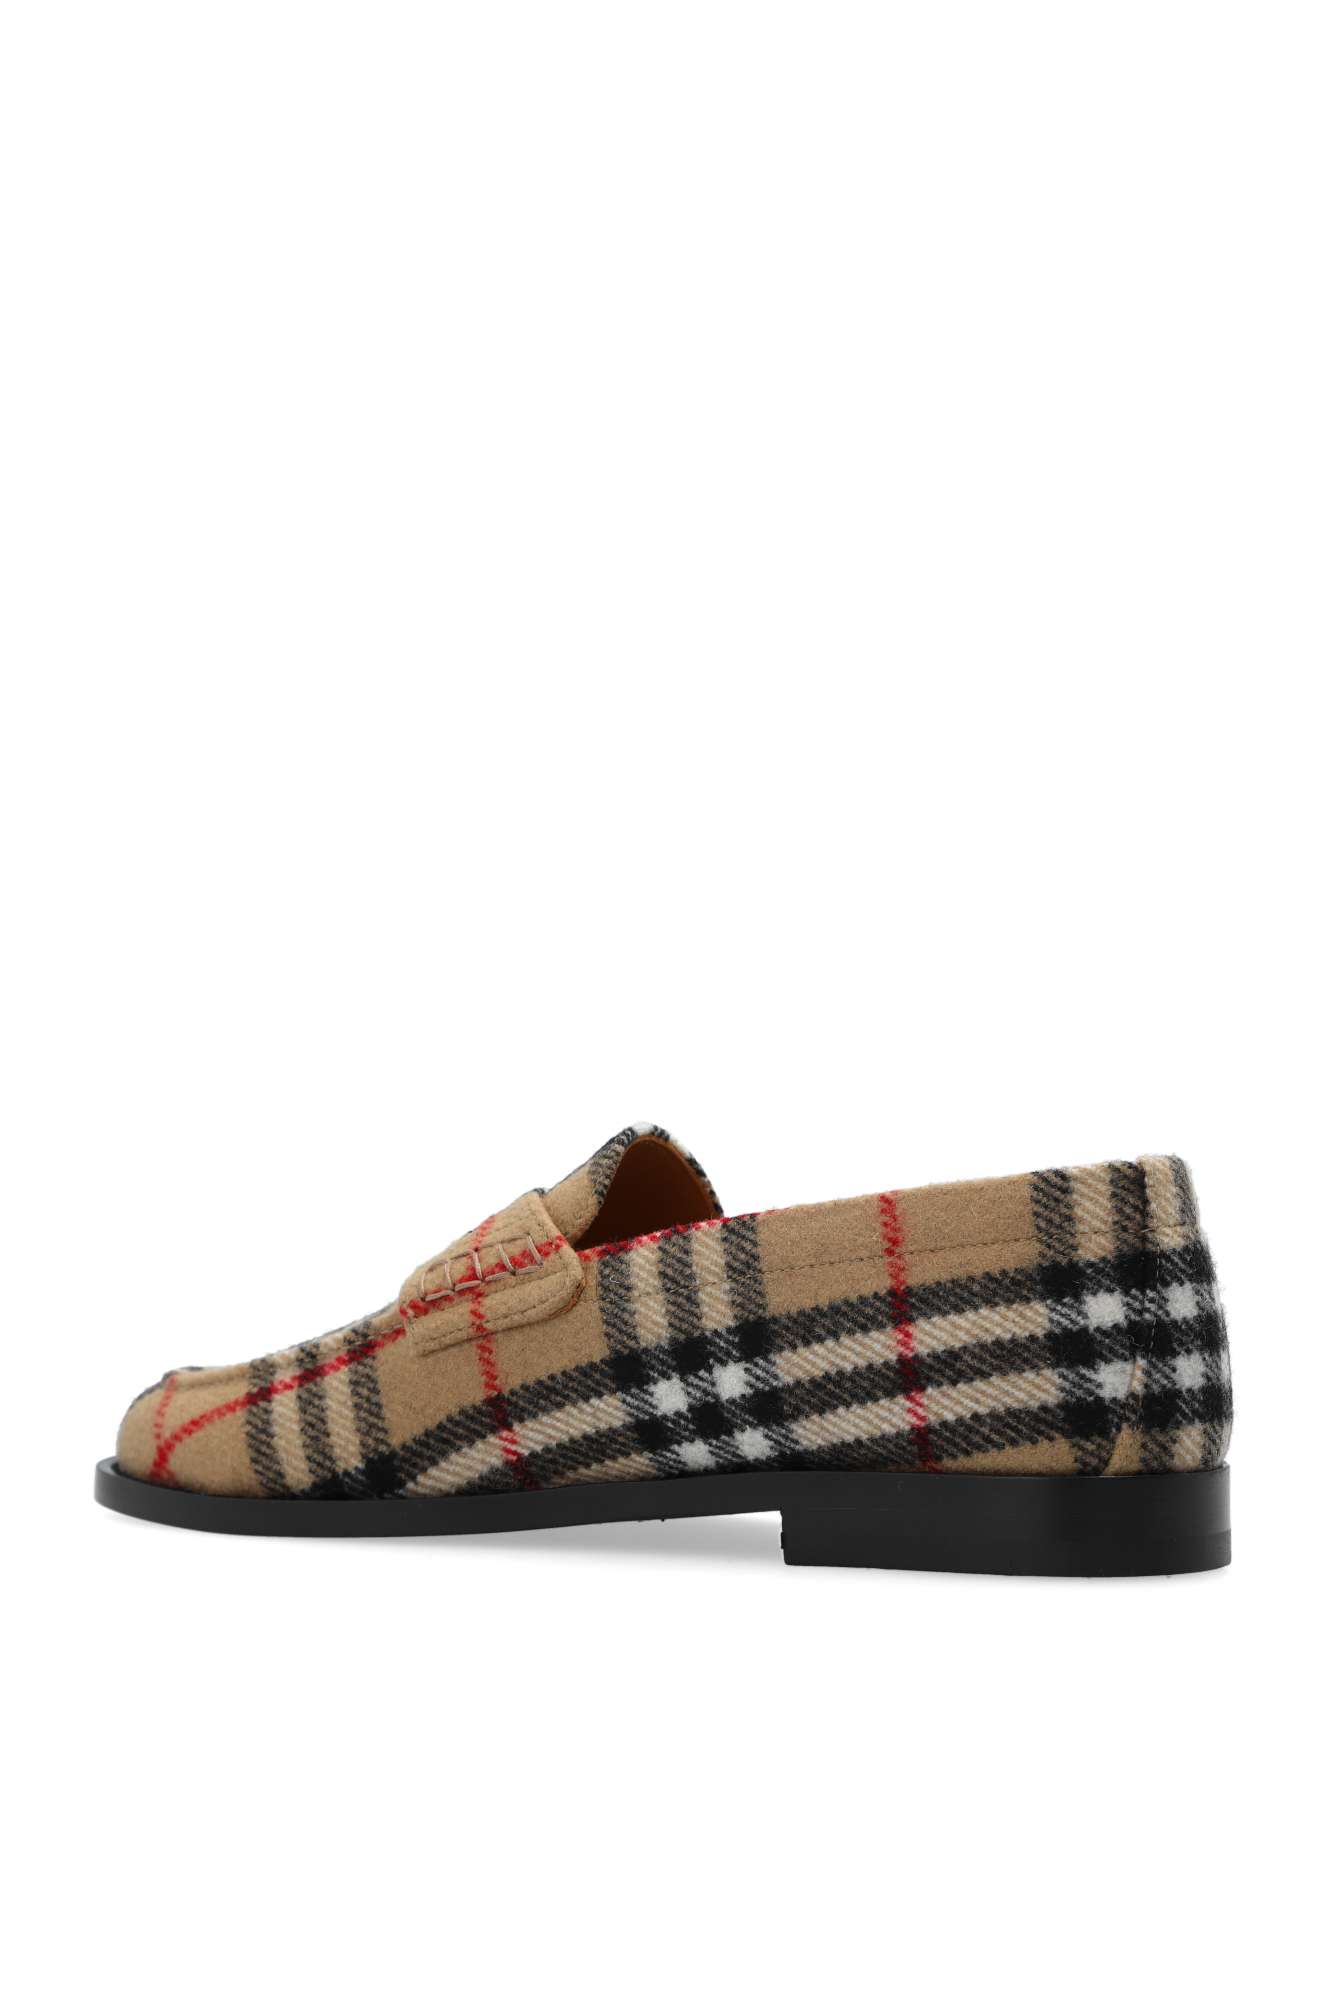 Burberry ‘Hackney’ loafers